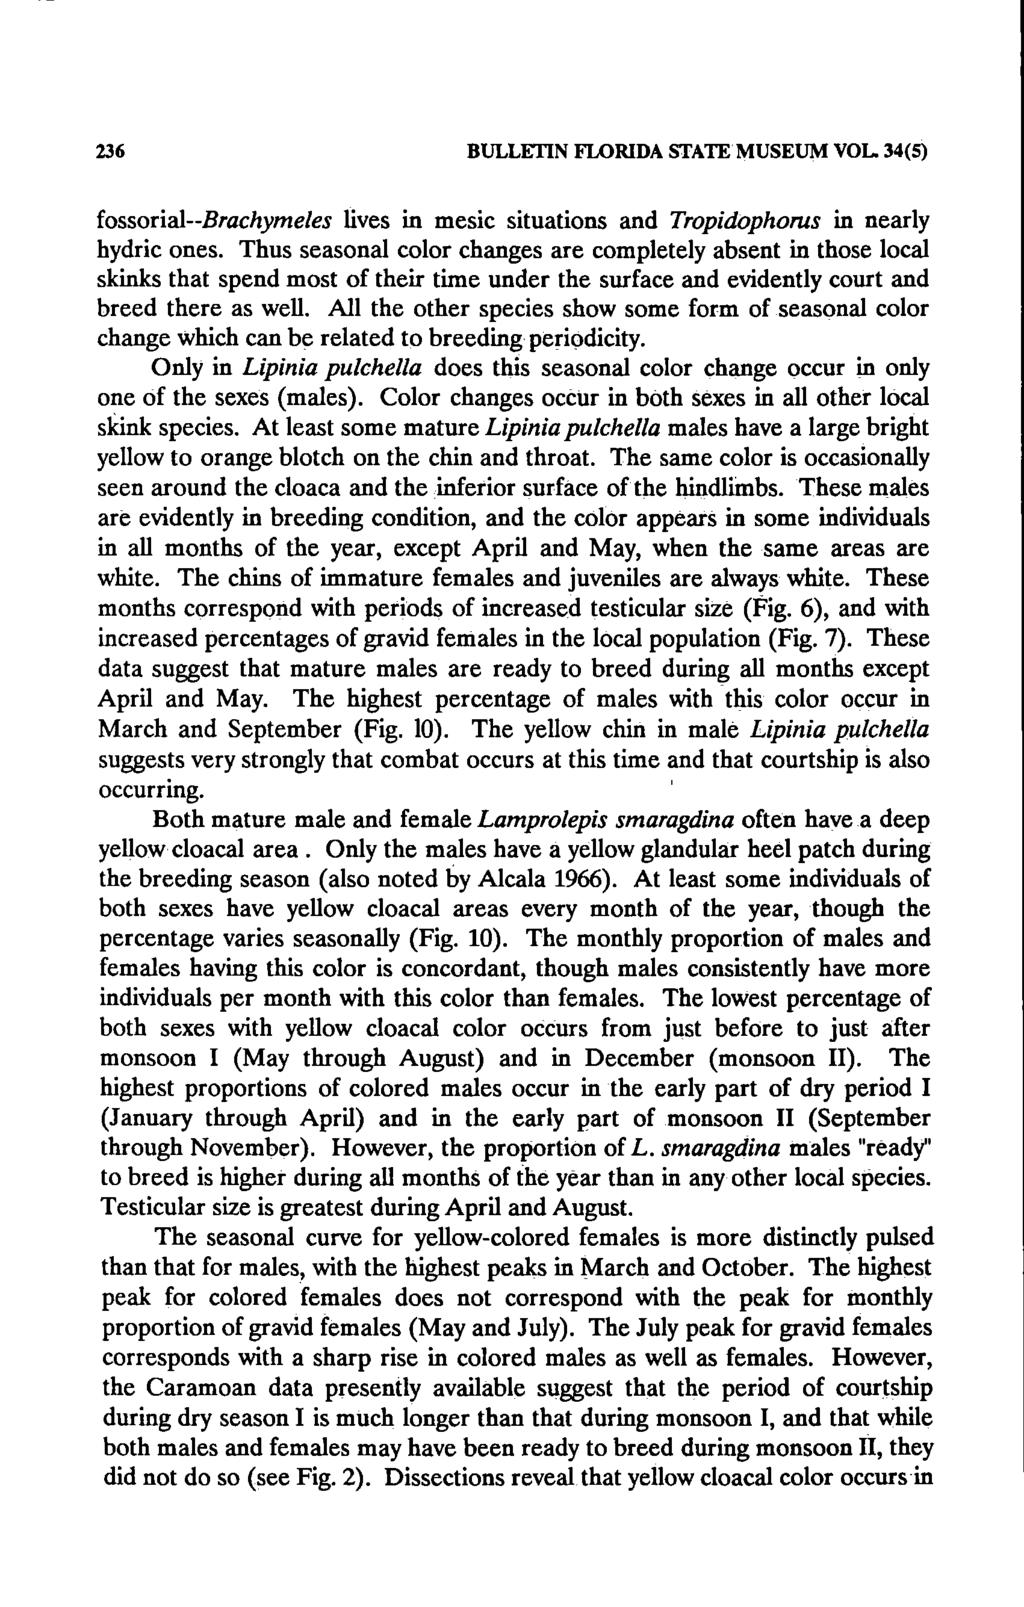 236 BULLETIN FLORIDA STATE MUSEUM VOL 34(5) fossorial--brachymetes lives in mesic situations and Tropidophoms in nearly hydric ones.